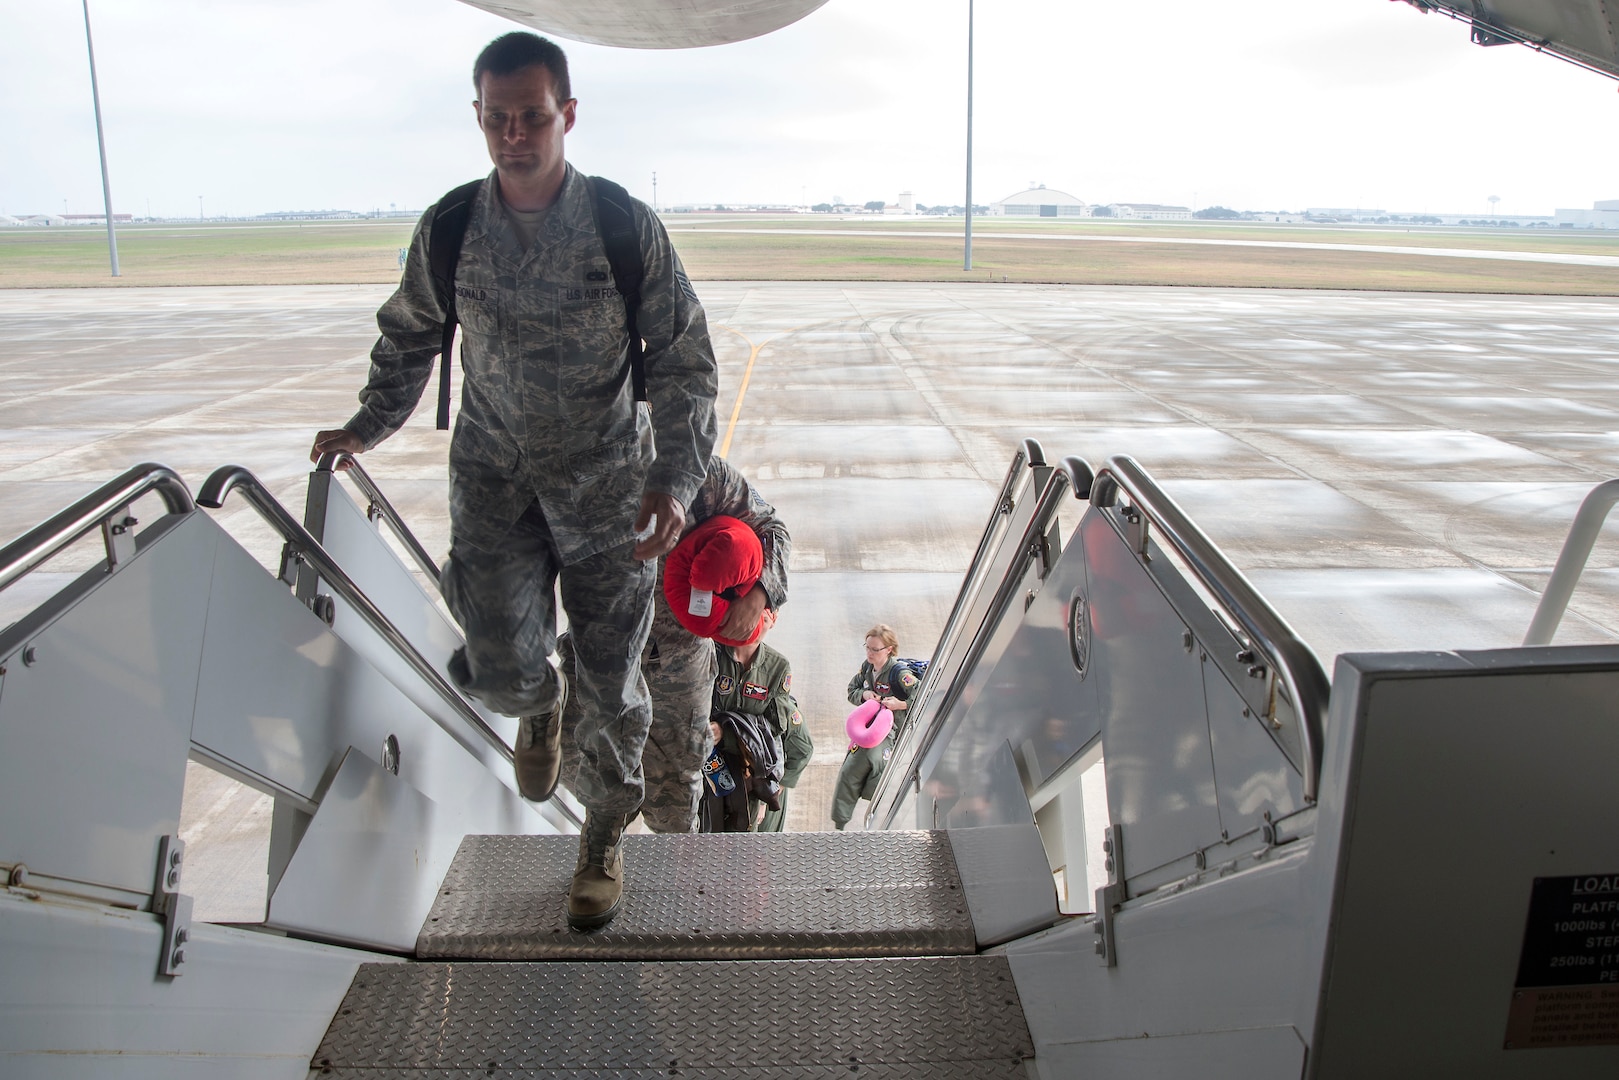 U.S. Air Force service members board a C-5M Super Galaxy from the Joint Base San Antonio-Lackland Passenger Terminal at old Kelly Air Force Base, Texas, Feb. 7, 2017. The JBSA Passenger Terminal offers Space-Available, or Space-A, flights to service members and their dependents and retirees. (U.S. Air Force photo by Airman 1st Class Lauren Parsons/Released)